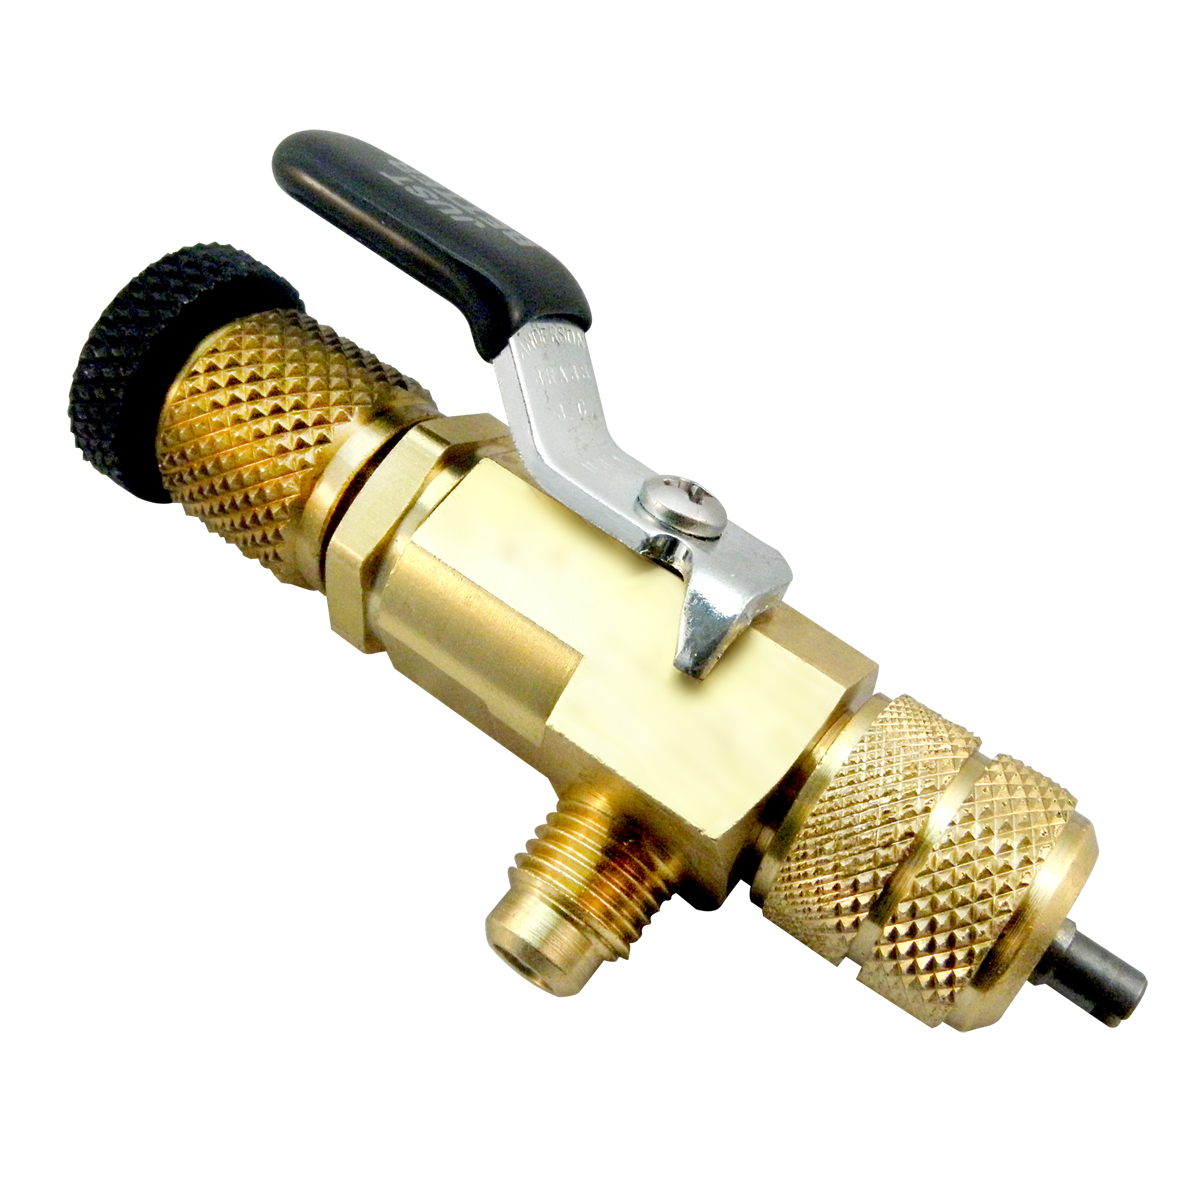 Vacuum Rated Valve Core Removal Tool with Access Port